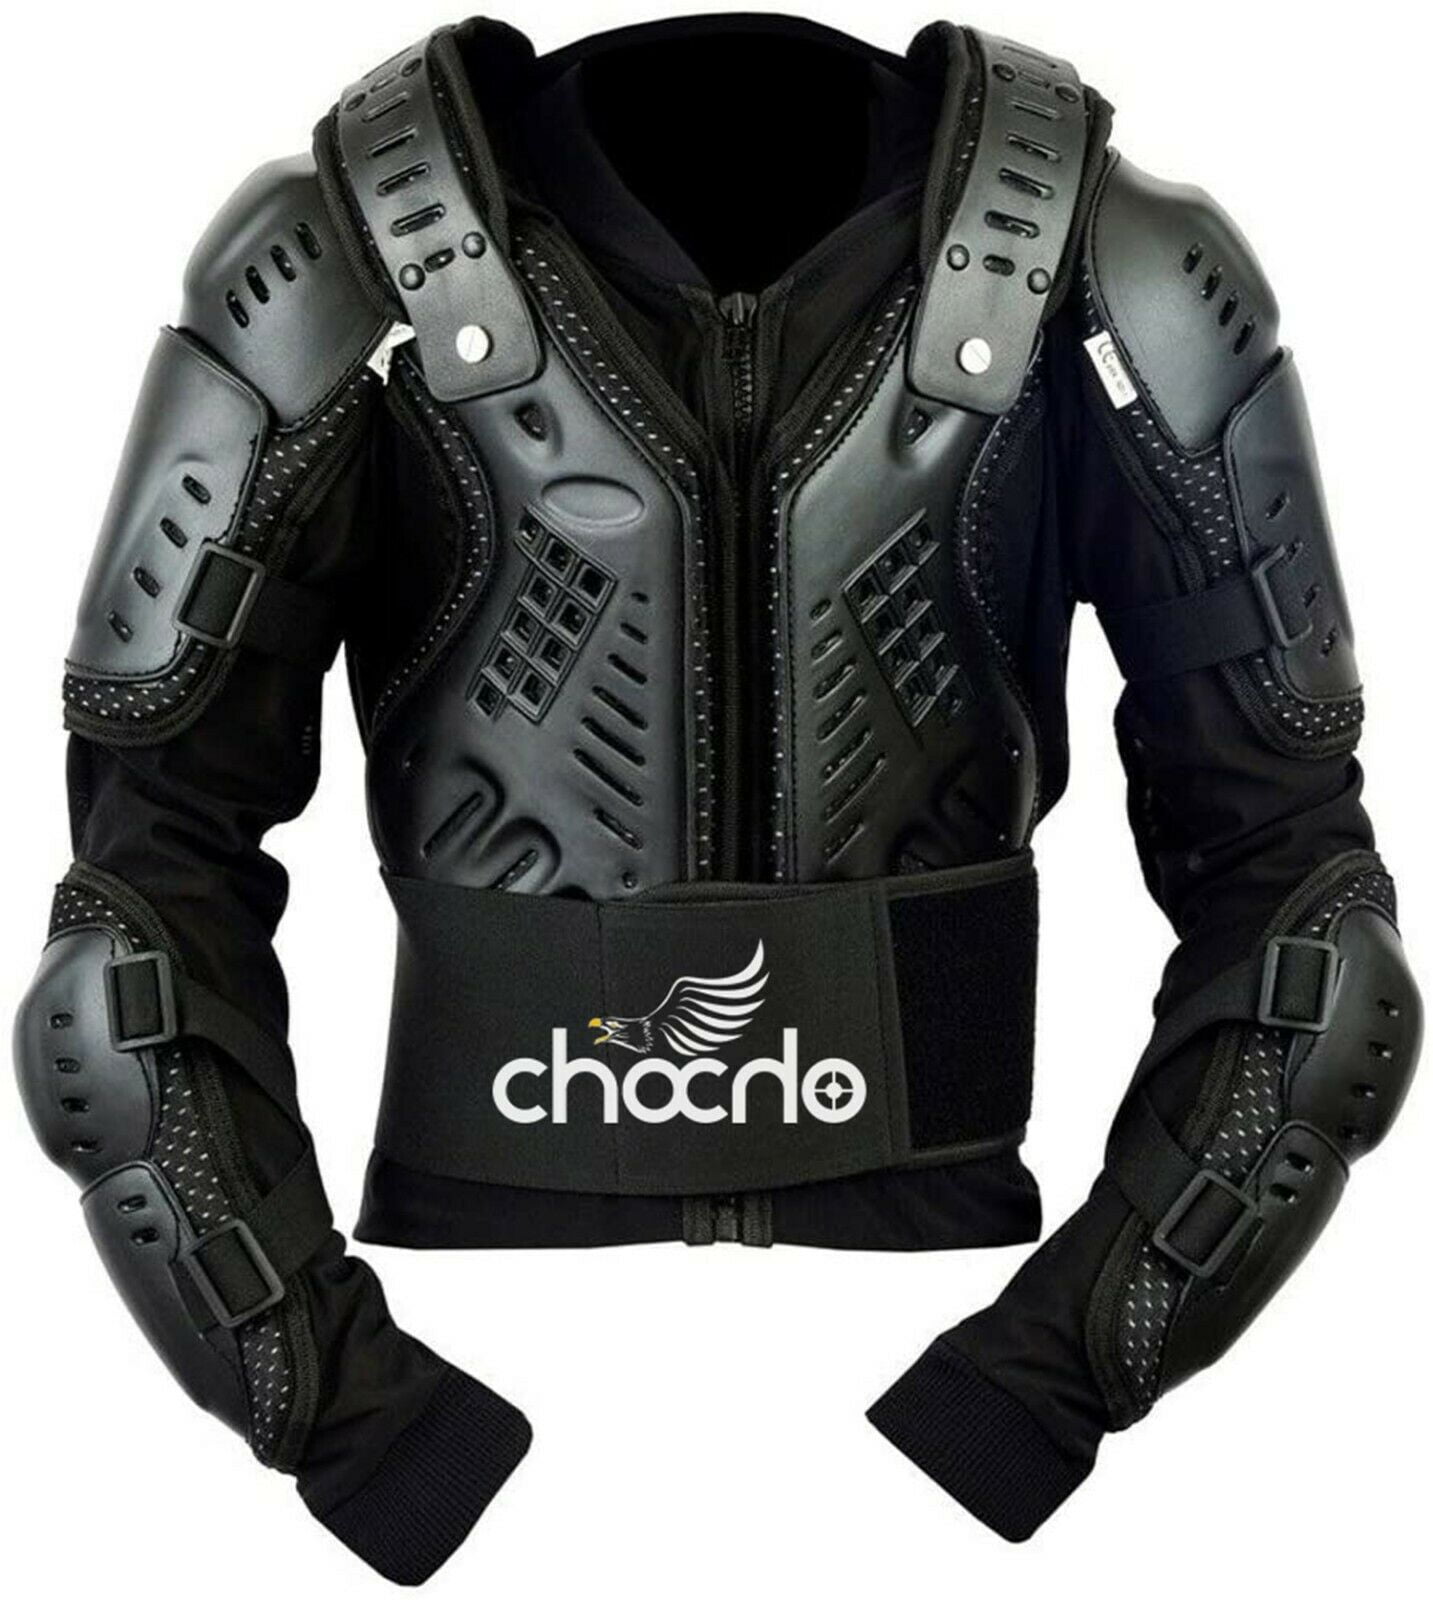 Motocross Motorbike Body Armour Motorcycle Protection Jacket Armoured Mountain Cycling Riding Skating Snowboarding Track Crash Guard CE Approved Black 